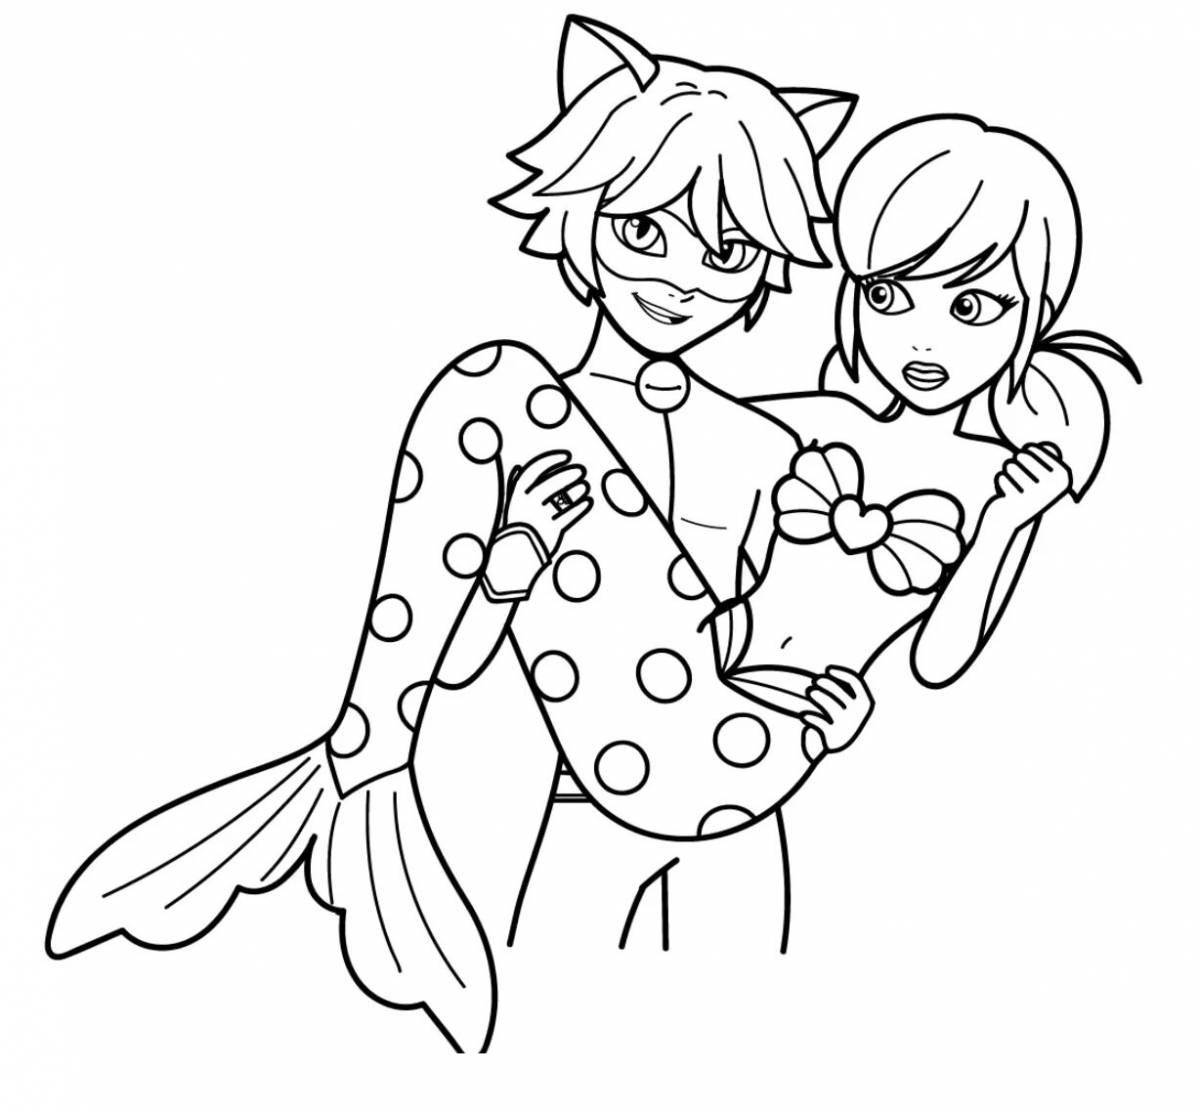 Marinette's playful baby coloring page